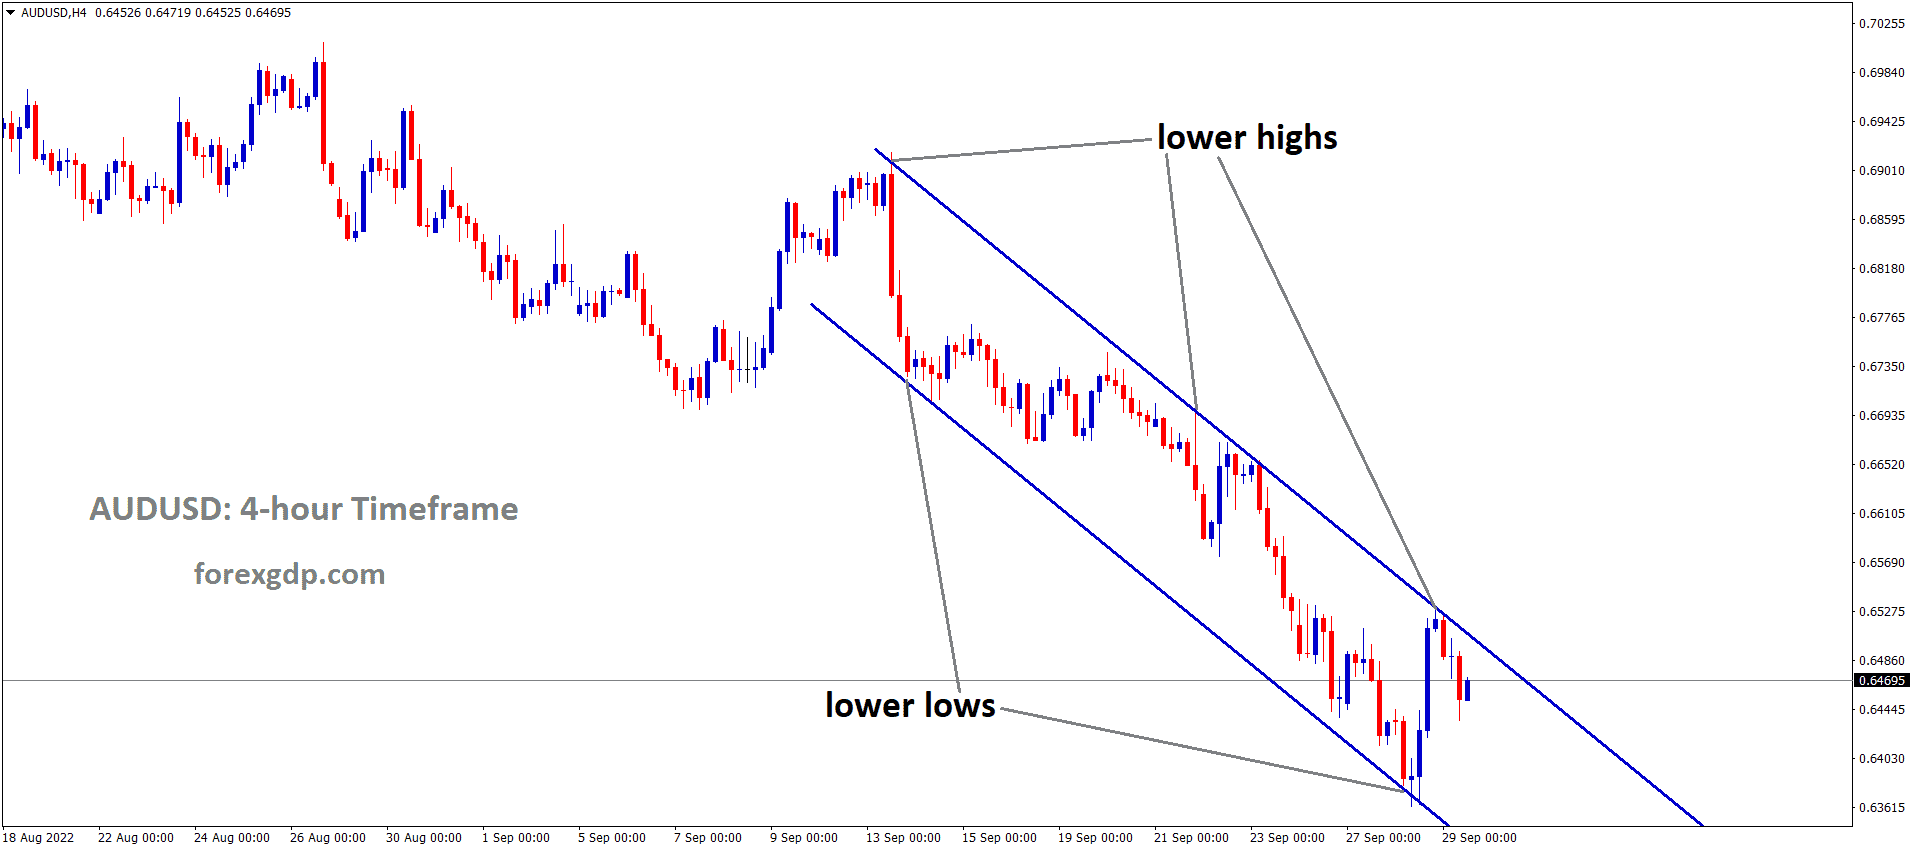 AUDUSD is moving in the Descending channel and the market has fallen from the lower high area of the channel